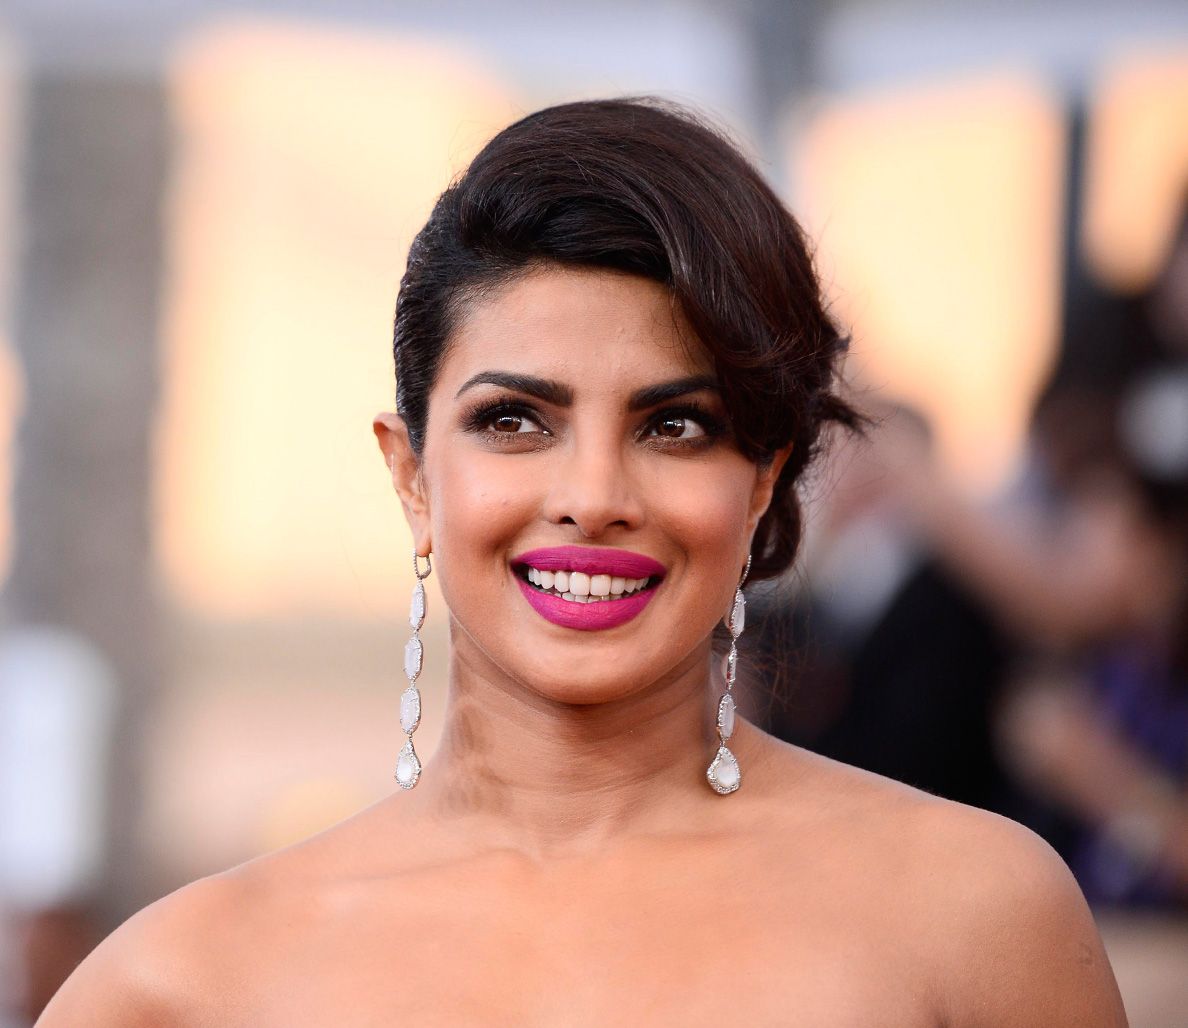 Priyanka Feels The Academy Should Have More Than One Award For Foreign Language Films